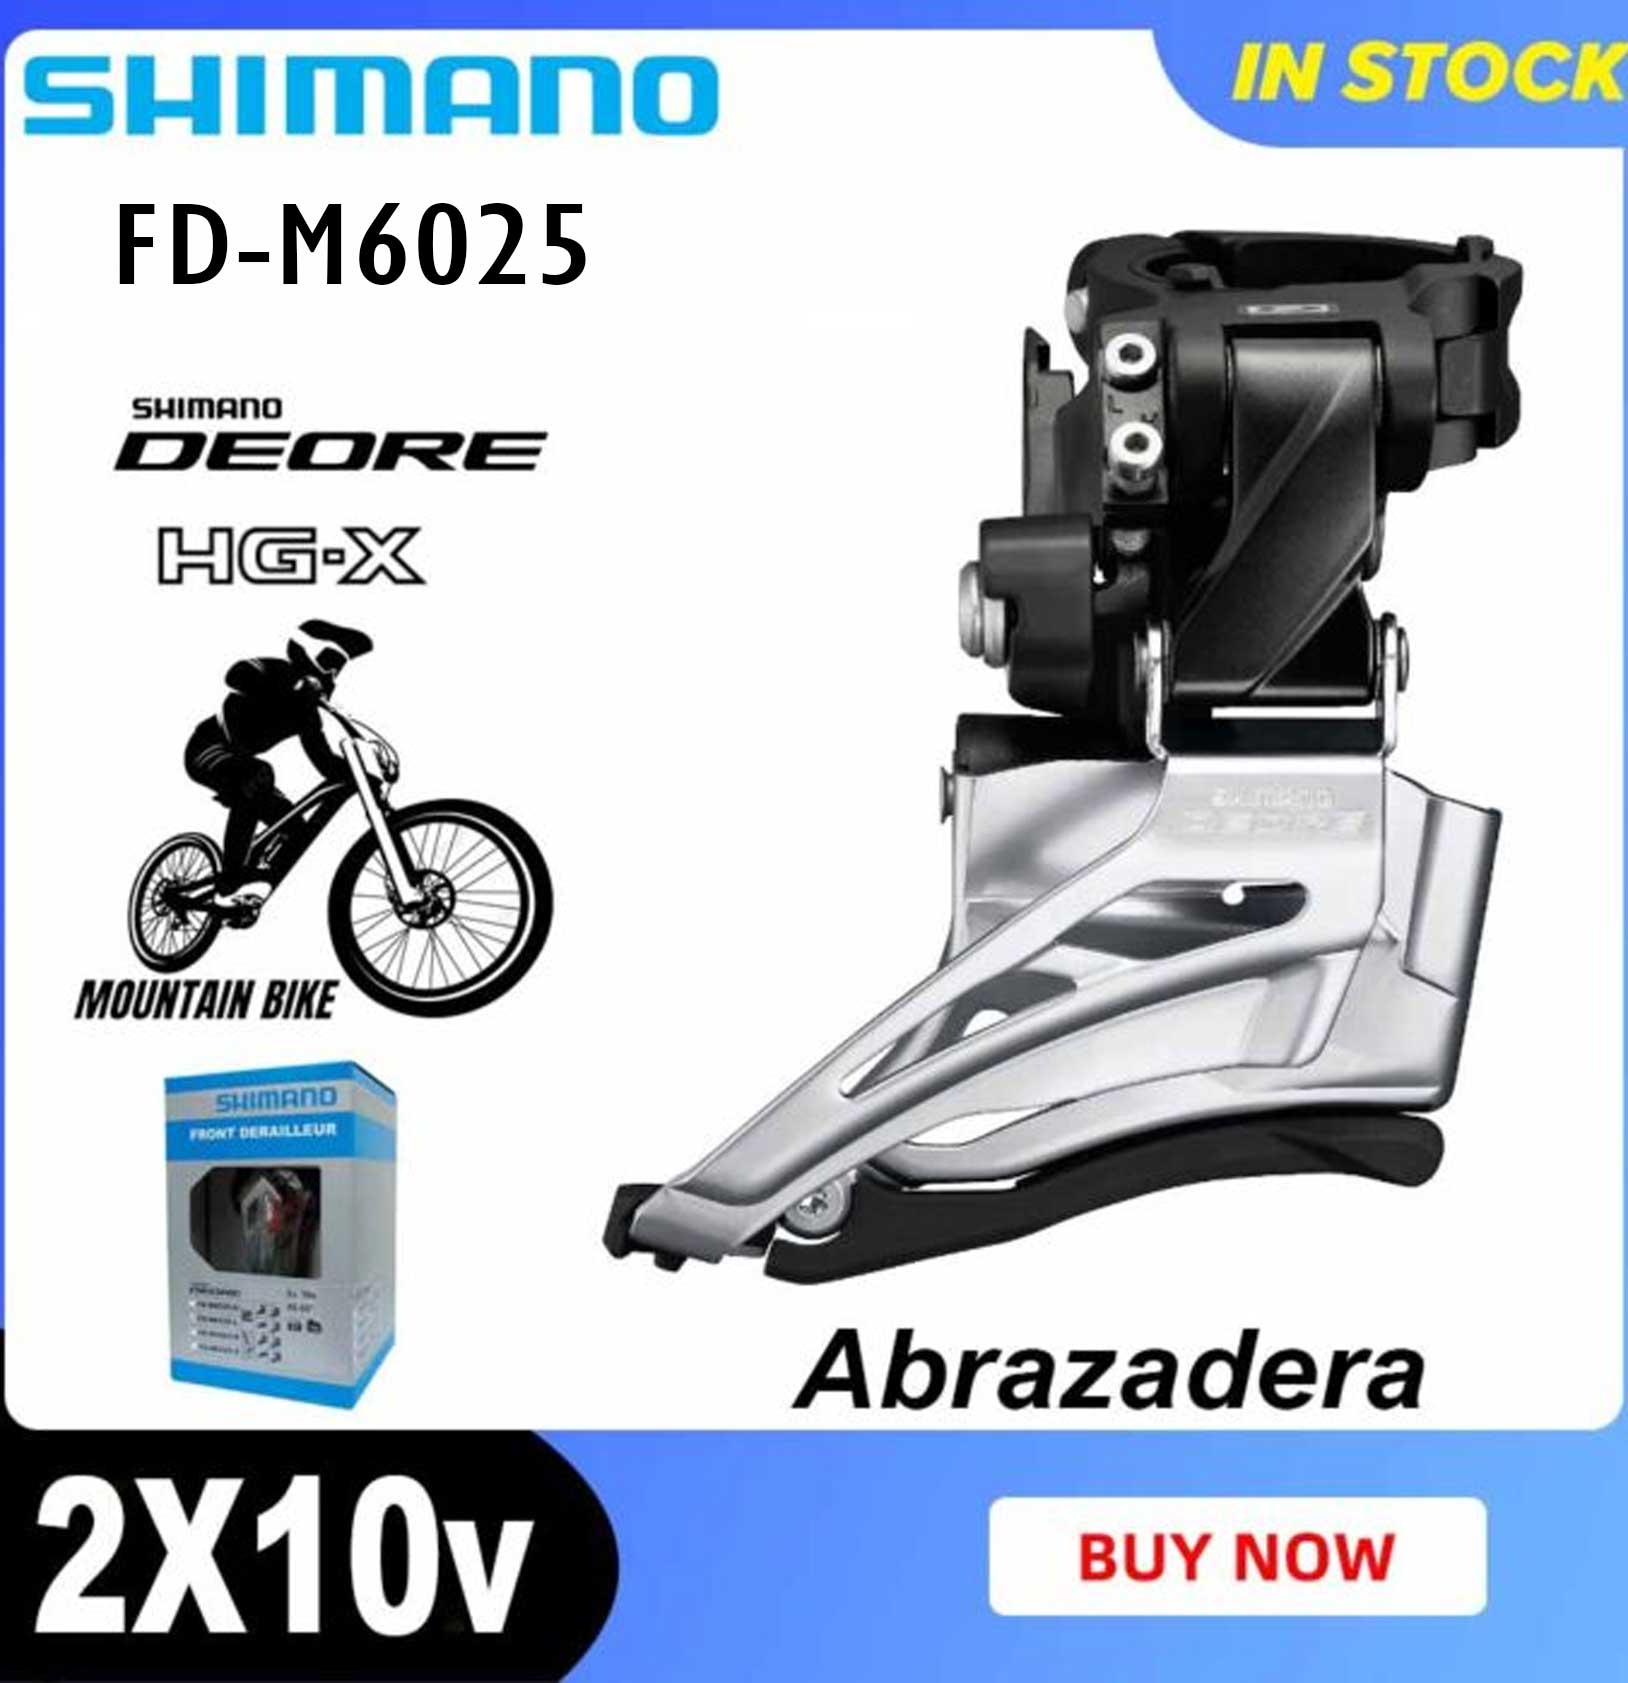 DESVIADOR SHIMANO FD-M6025 DEORE 2X10 HIGH CLAMP | IND. PACK » Babylon Imports Bike